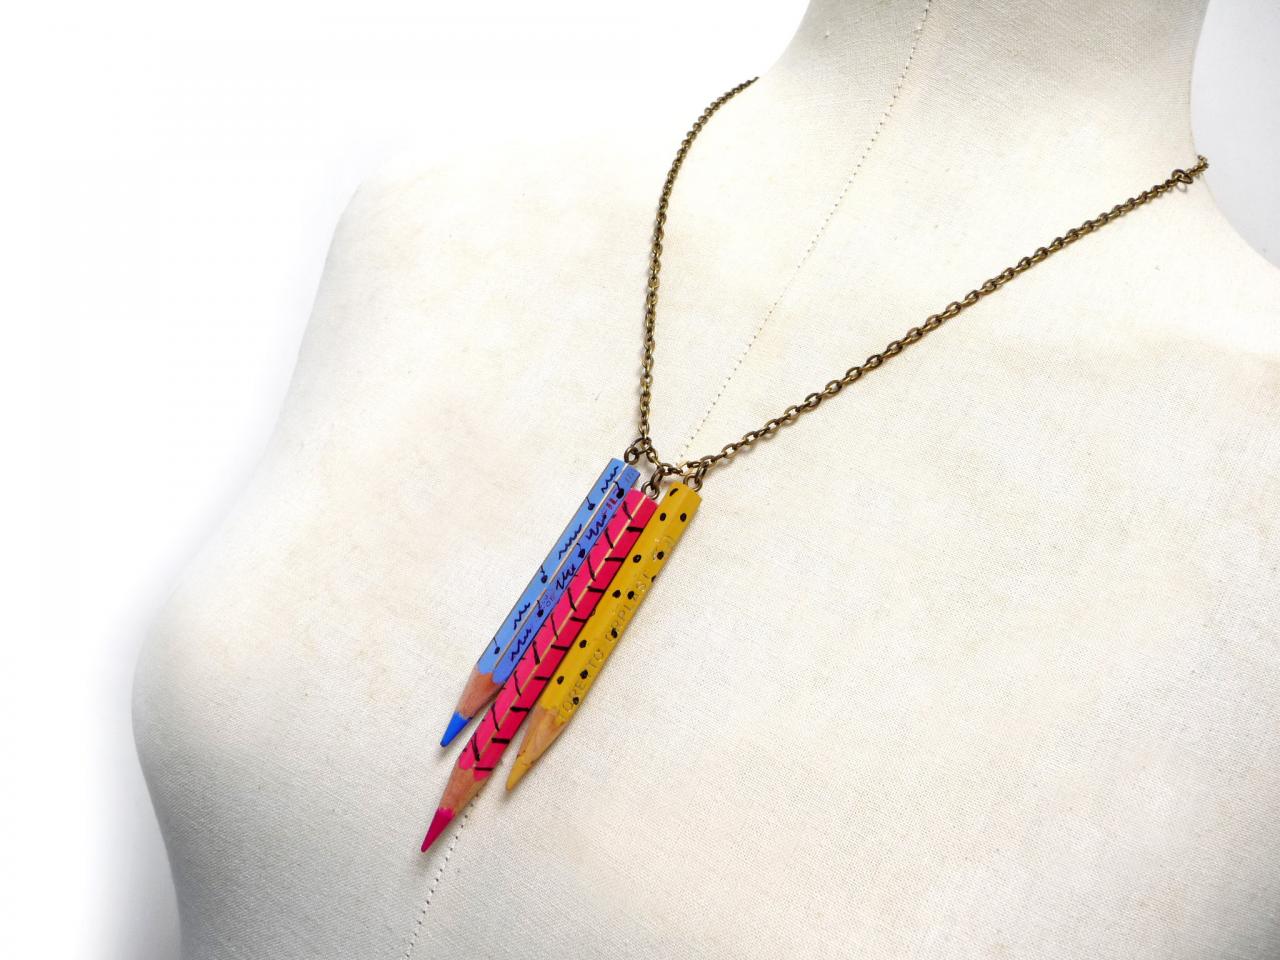 Color Pencil Necklace With Brass Chain - Light Blue, Pink, Yellow Crayons Charms - Upcycled, Recycled, Back To School, Teacher, Schoolmate